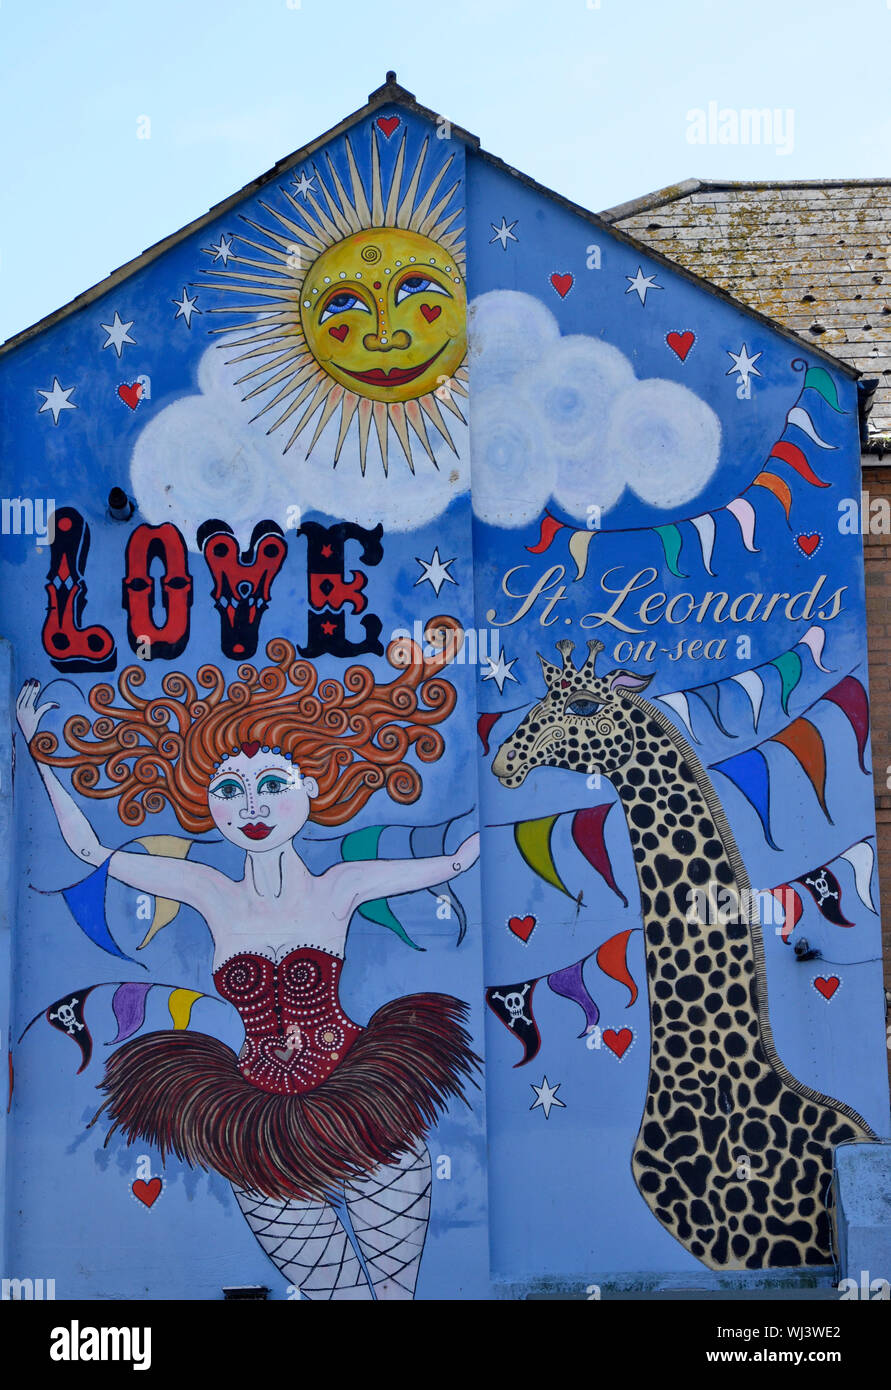 A welcoming mural on a café in St. Leonards, Hastings. Stock Photo